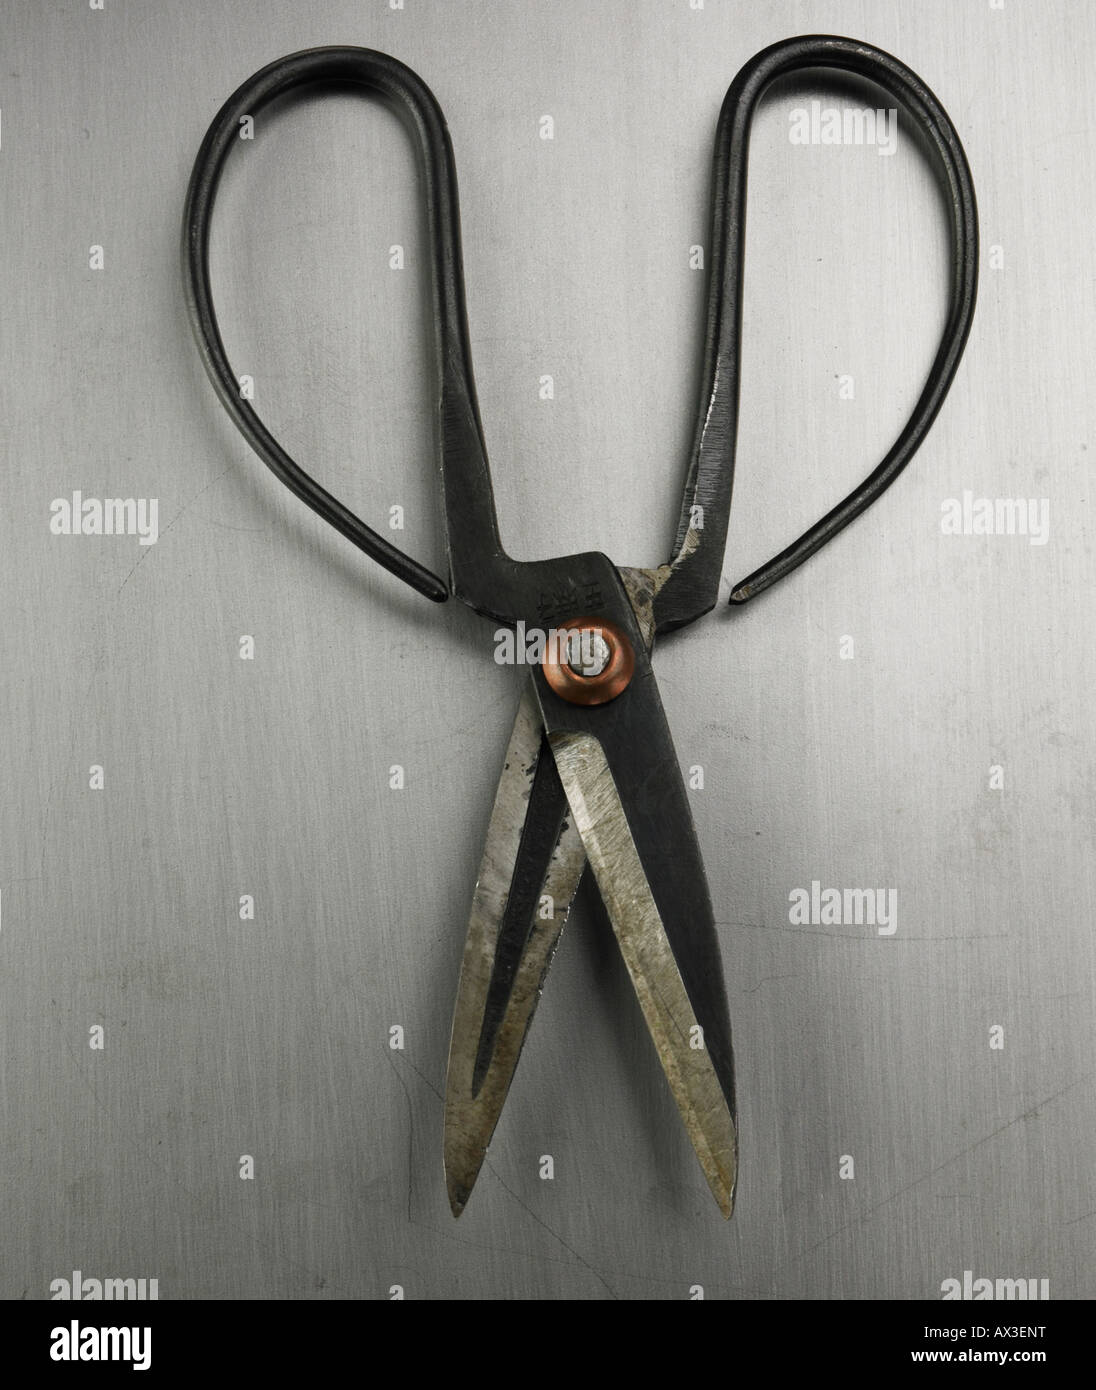 Pair of vintage Japanese scissor shears on a clean stainless steel surface. Stock Photo